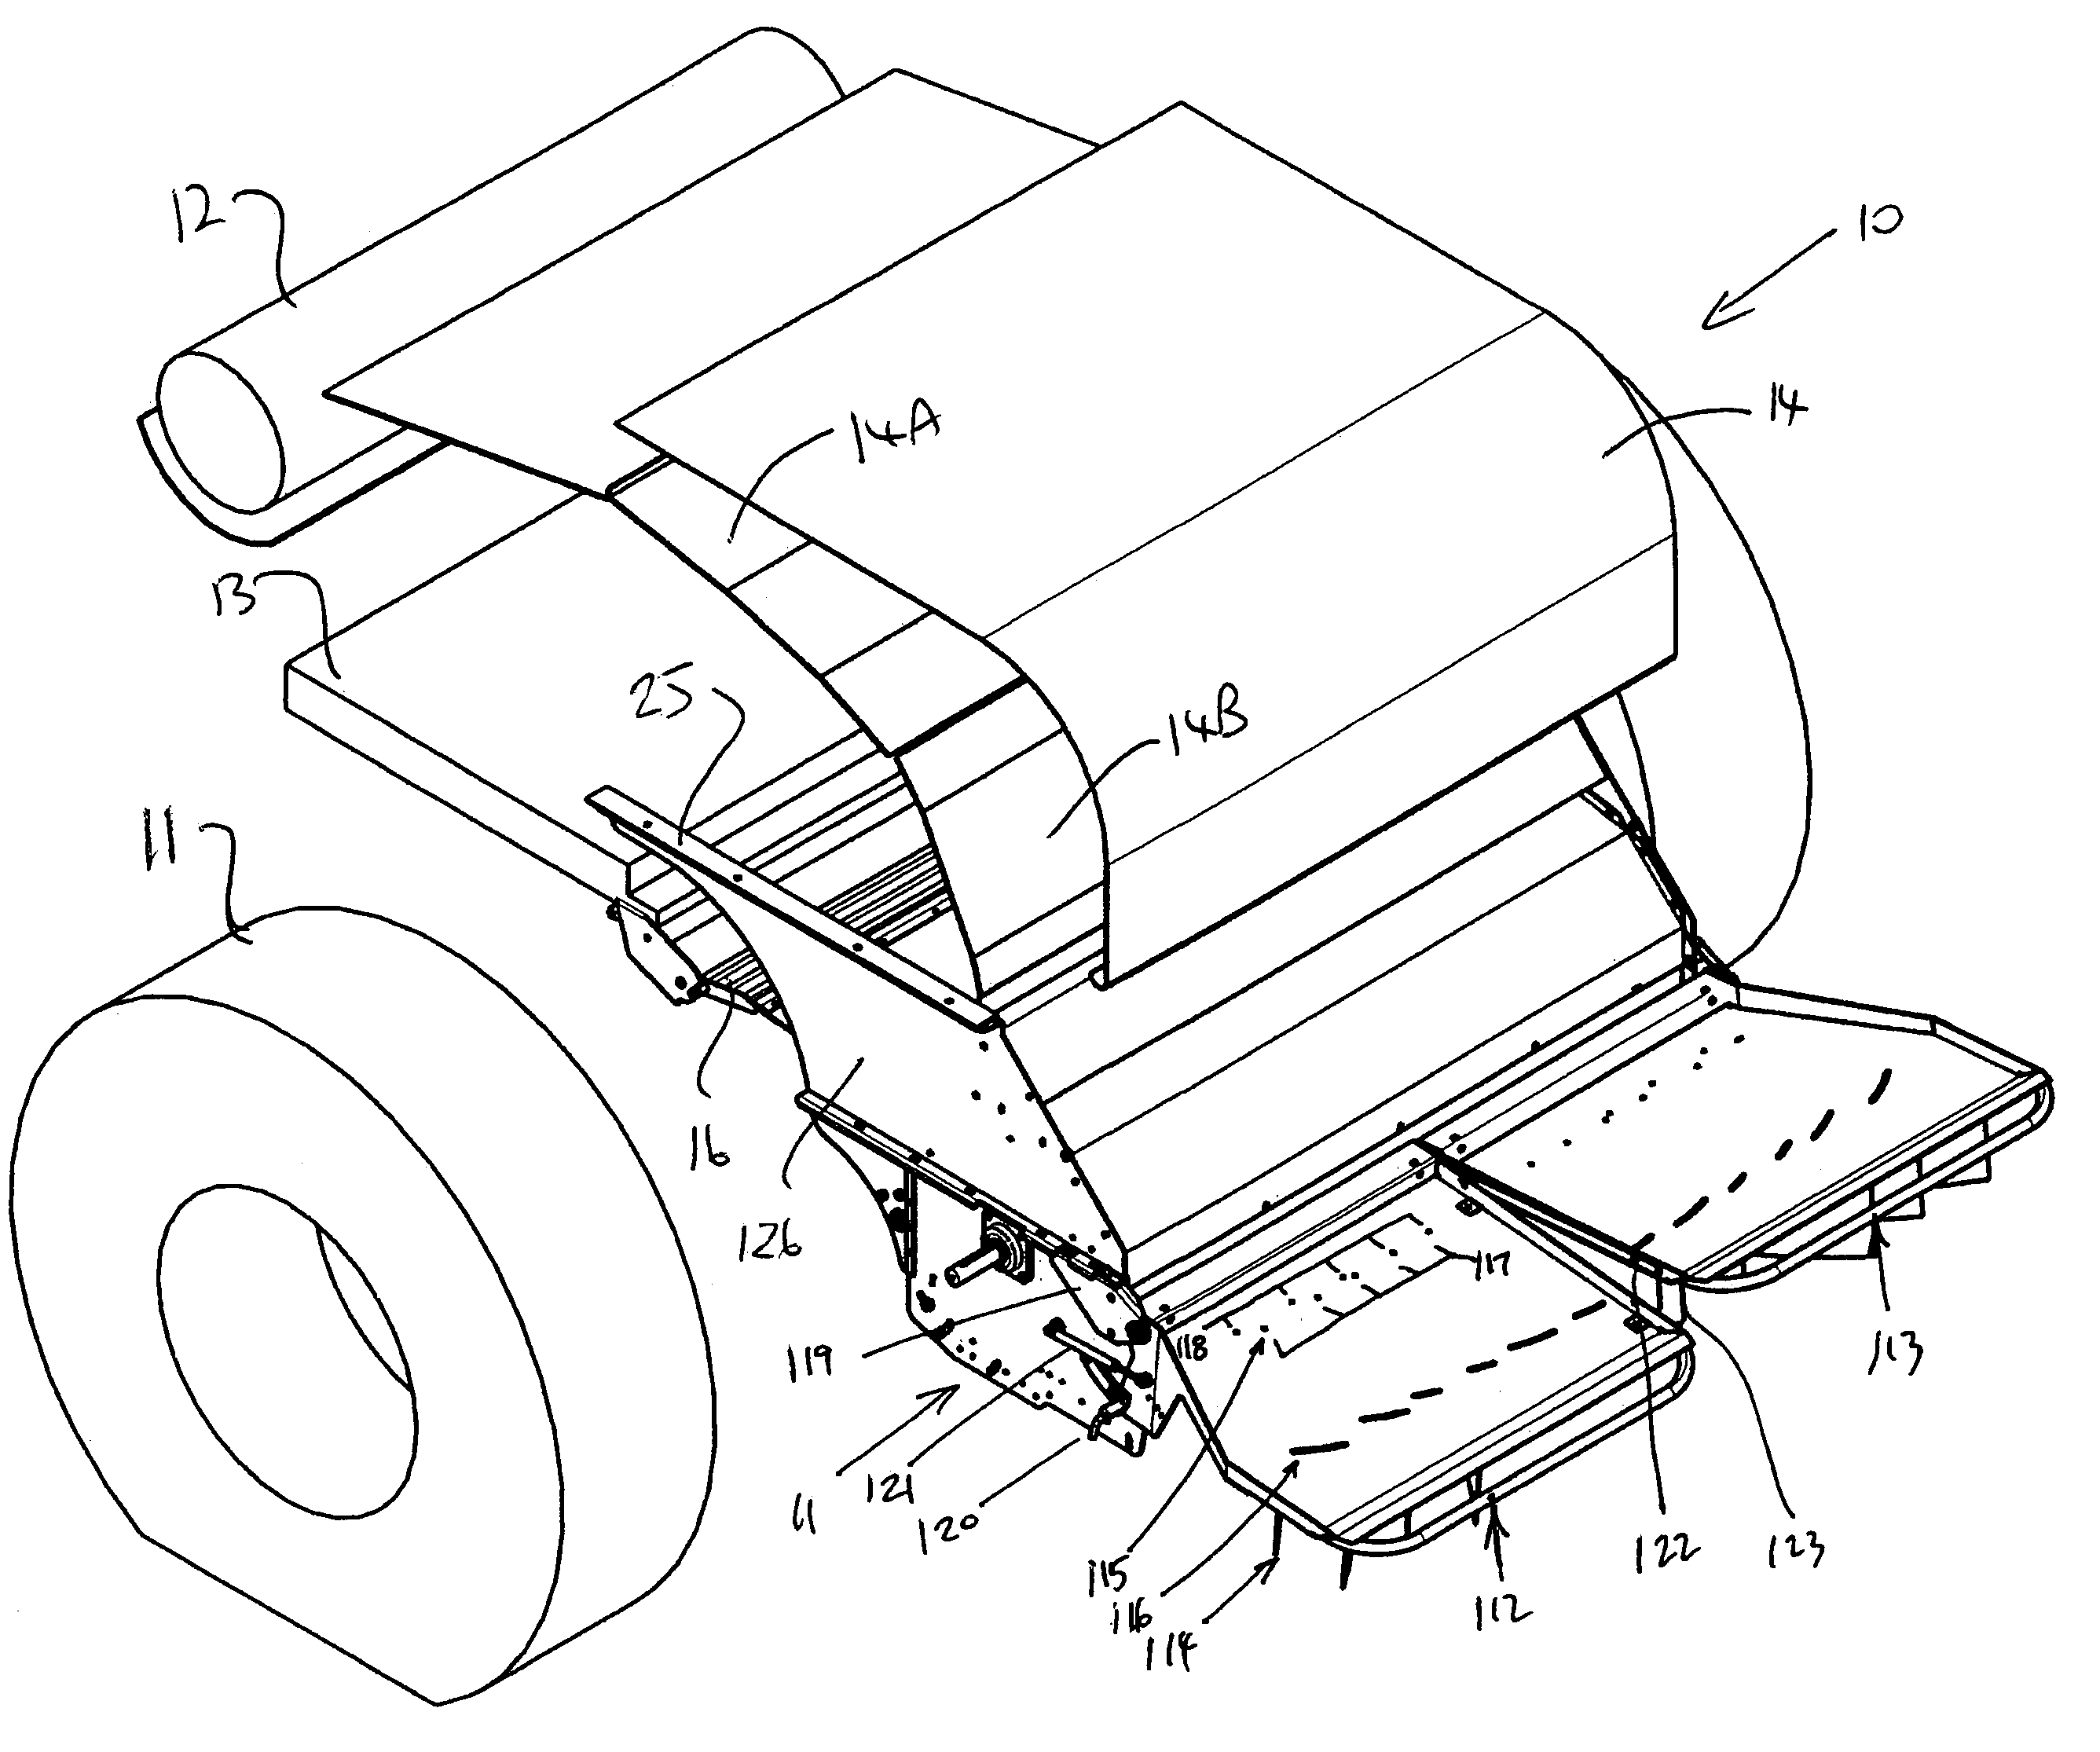 Combine harvester with a spreader having independent spread width control